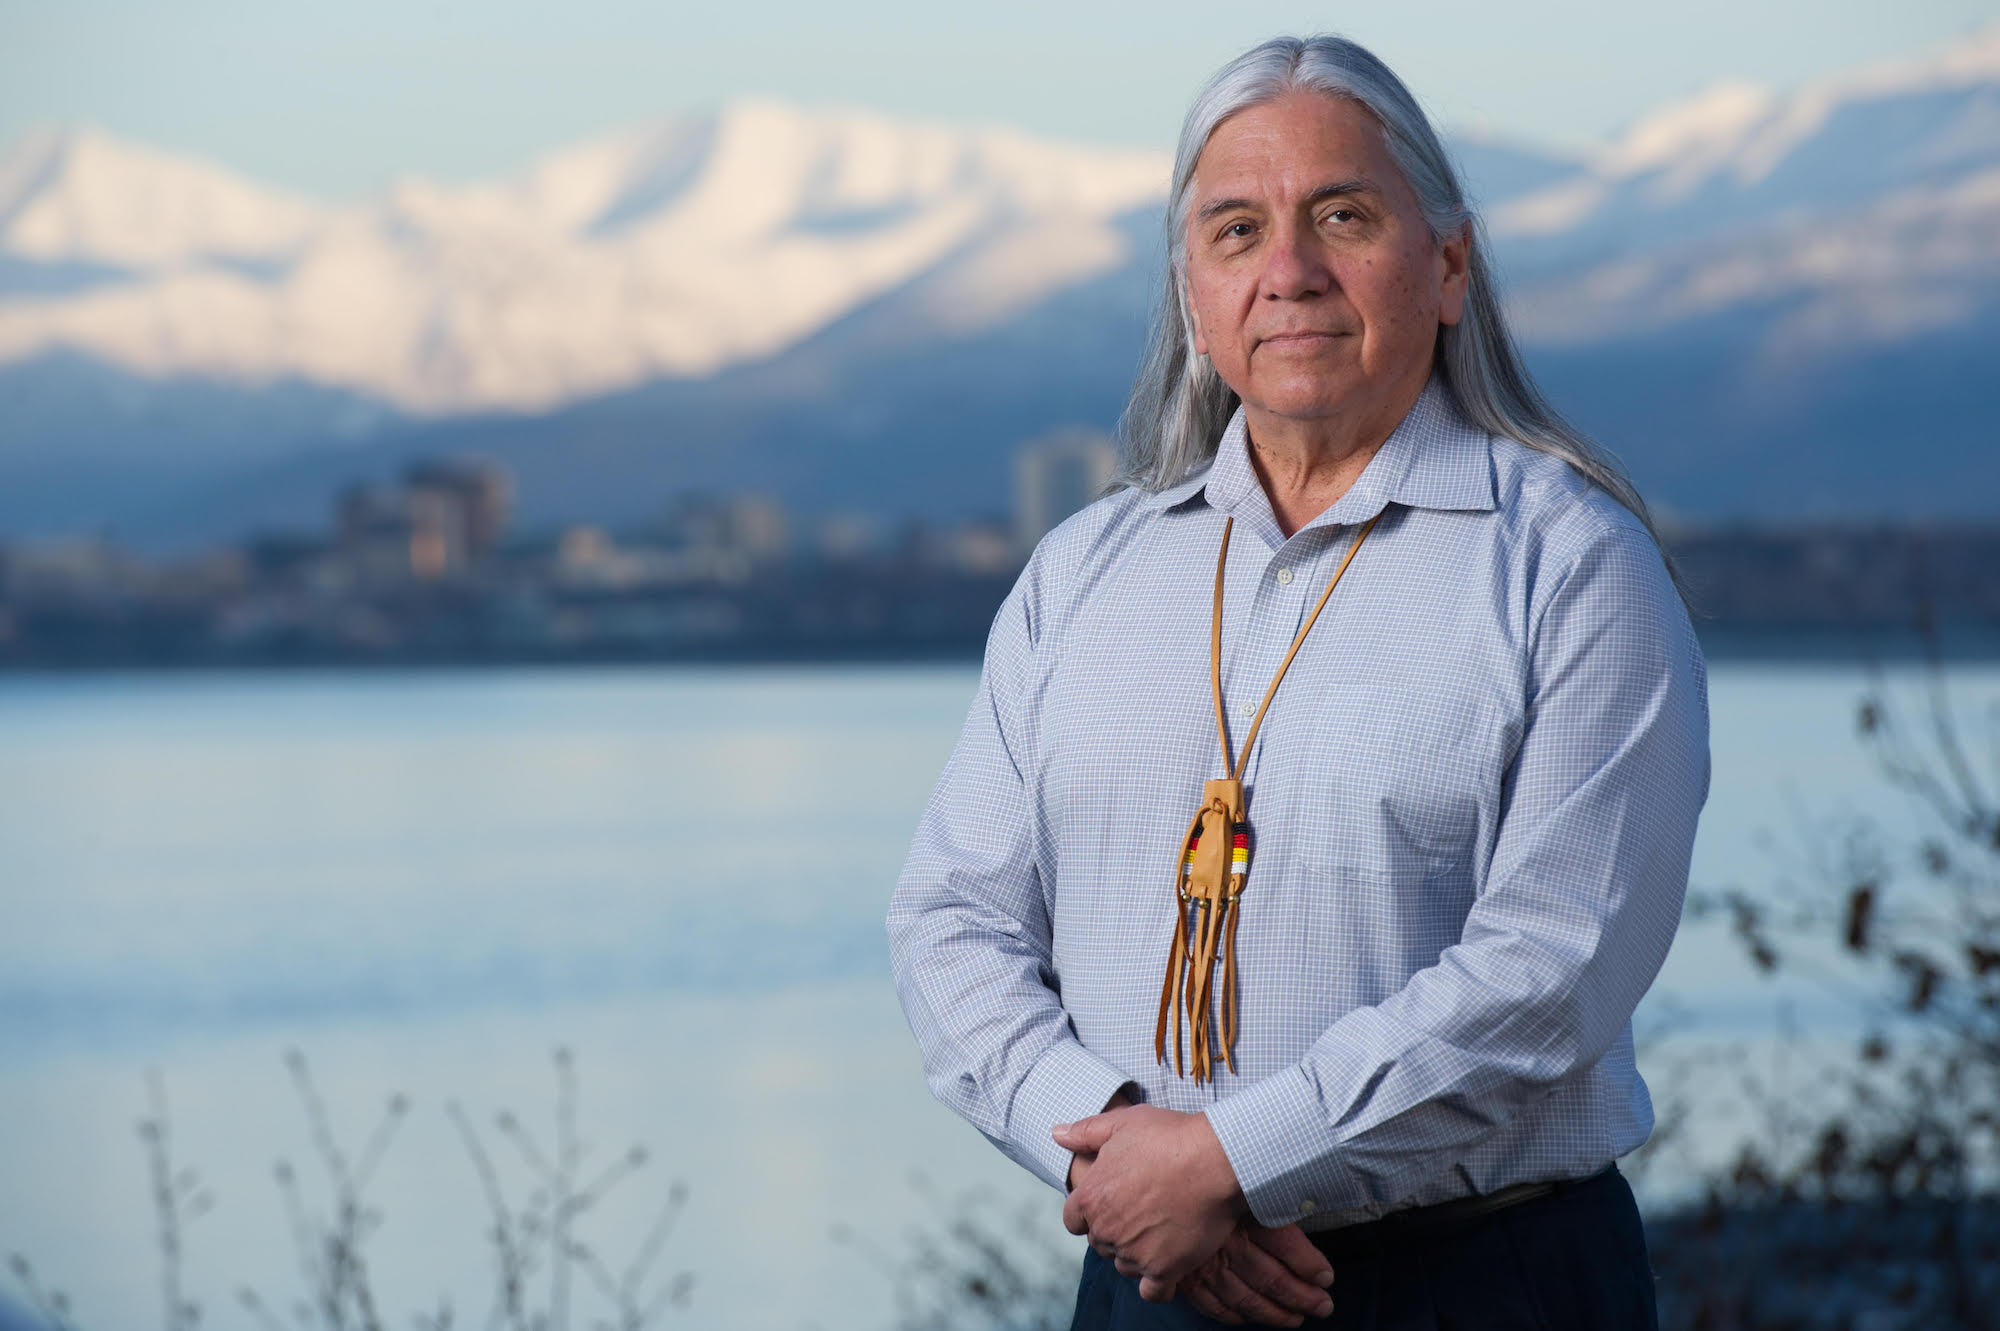 A man with long gray hair wearing a blue button-up shirt and leather necklace stands in front of a lake and snow-capped mountains